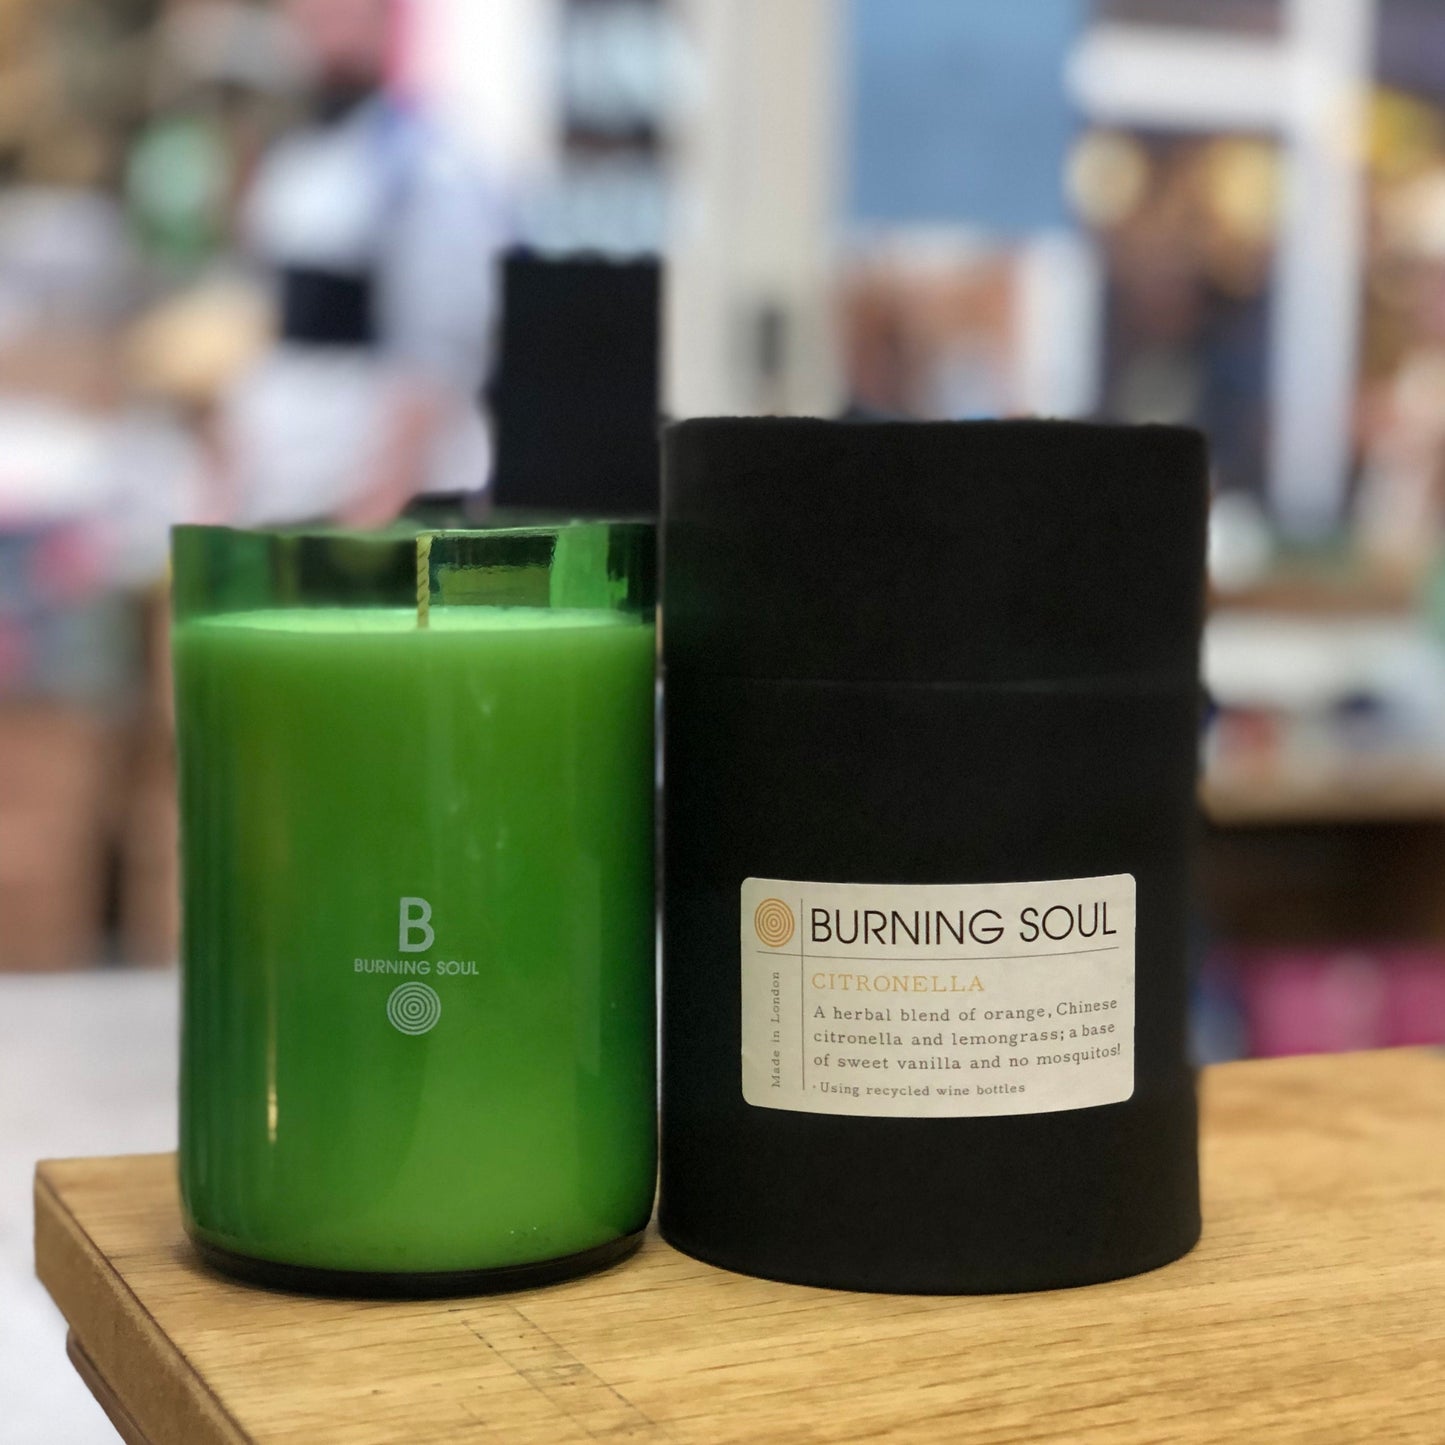 green glass candle made in upcycled wine bottle by burning soul london, container is black cardboard on wooden table - burning soul london